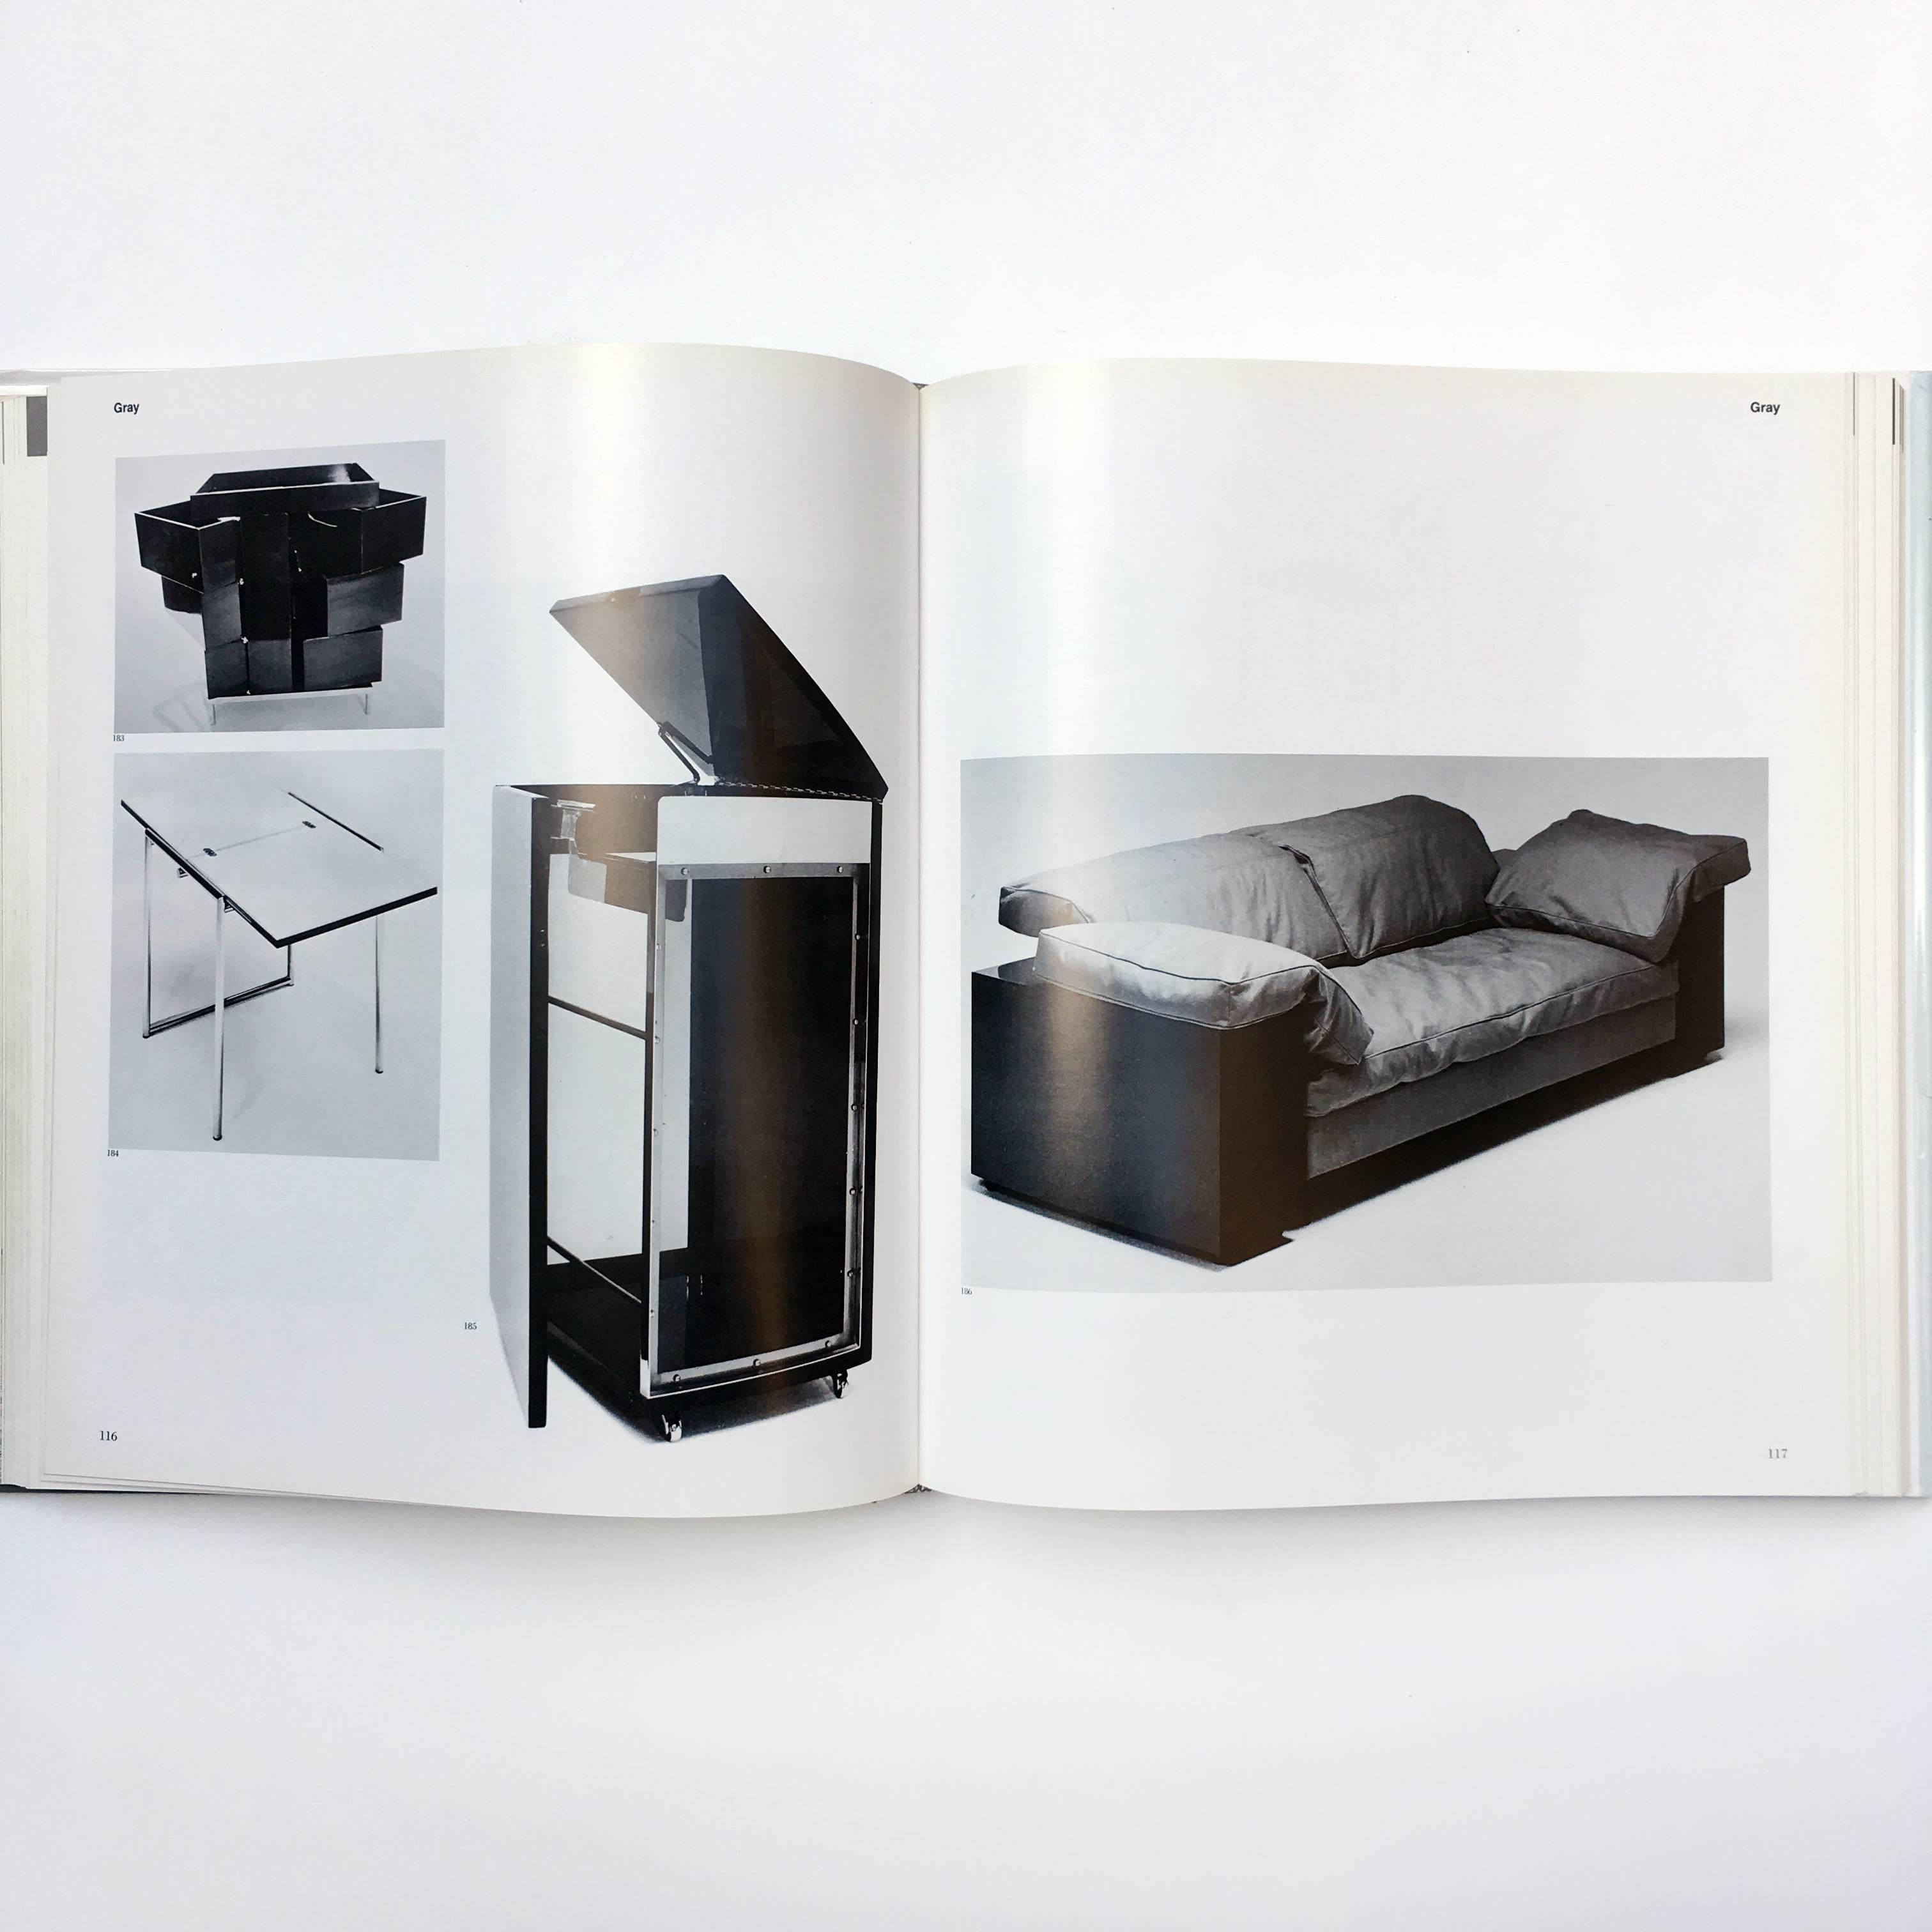 Published by Abrams, 2nd Edition 1988.

The idea of the architect as total designer dates to the eighteenth century using their vision to design not only the structure but also the interior. This book includes 600 pieces of furniture and home